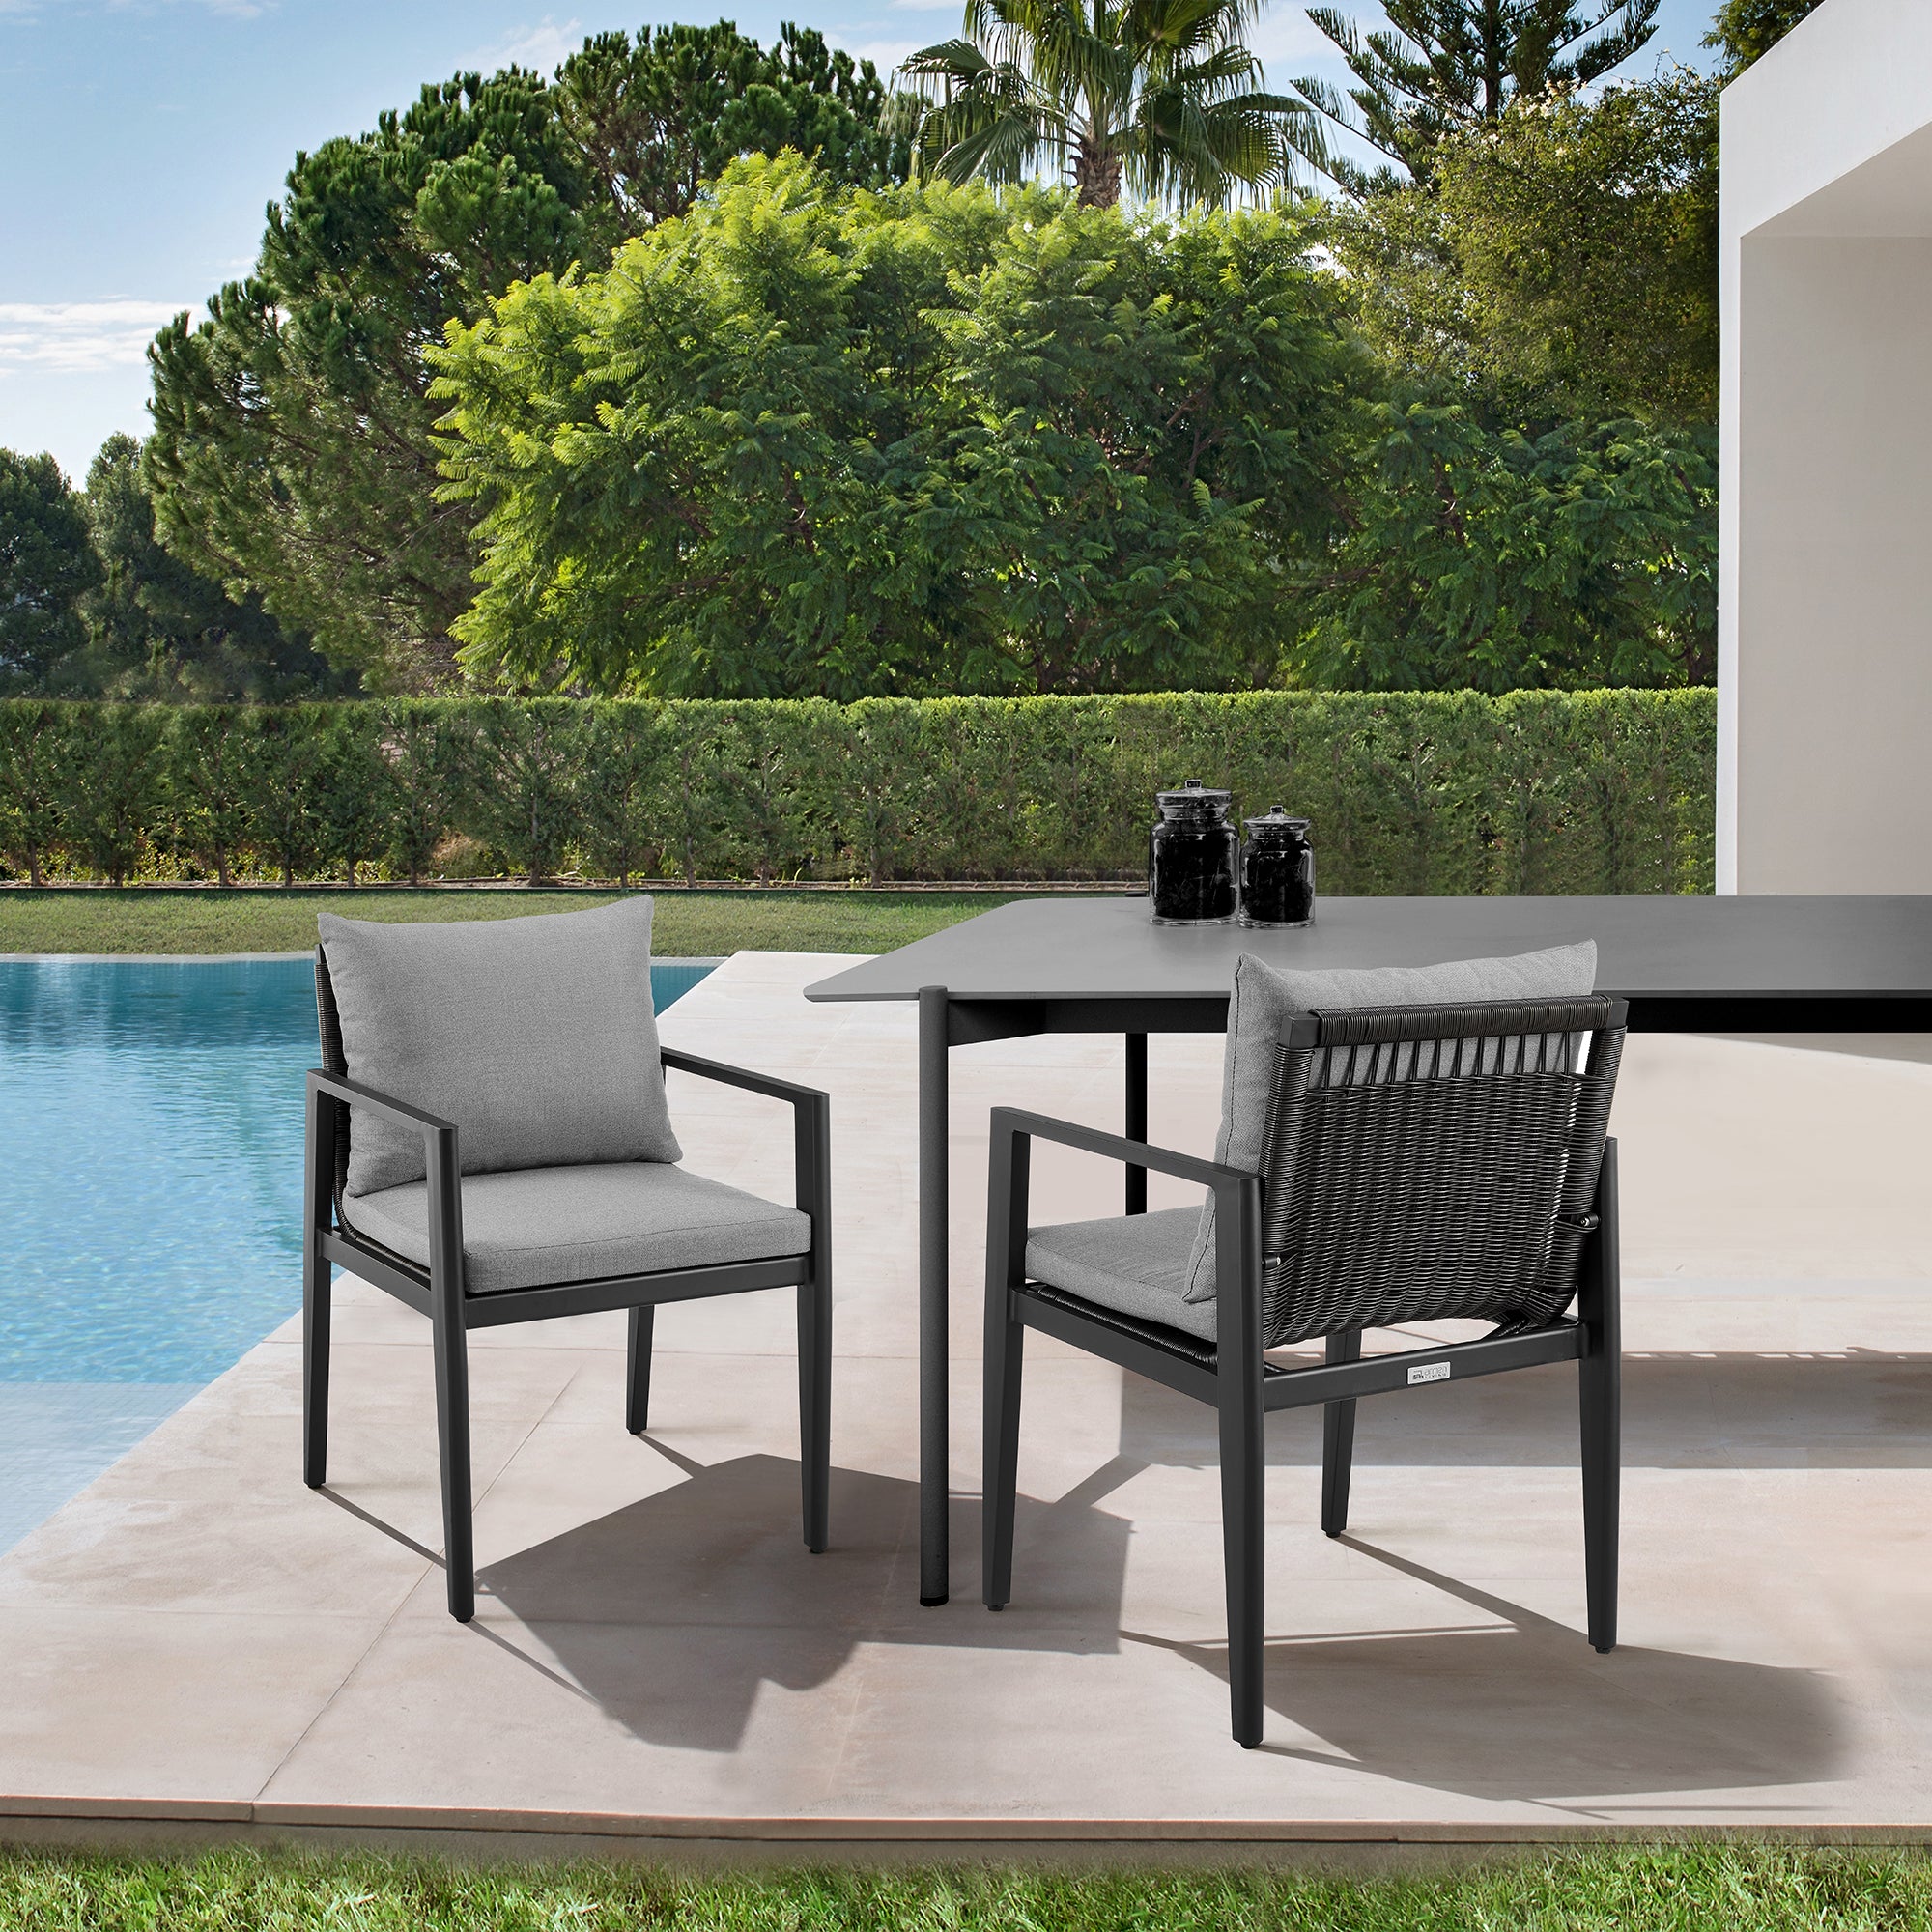 Armen Living - Grand Outdoor Patio Dining Chairs with Arms in Aluminum with Grey Cushions - Set of 2 - 840254332683